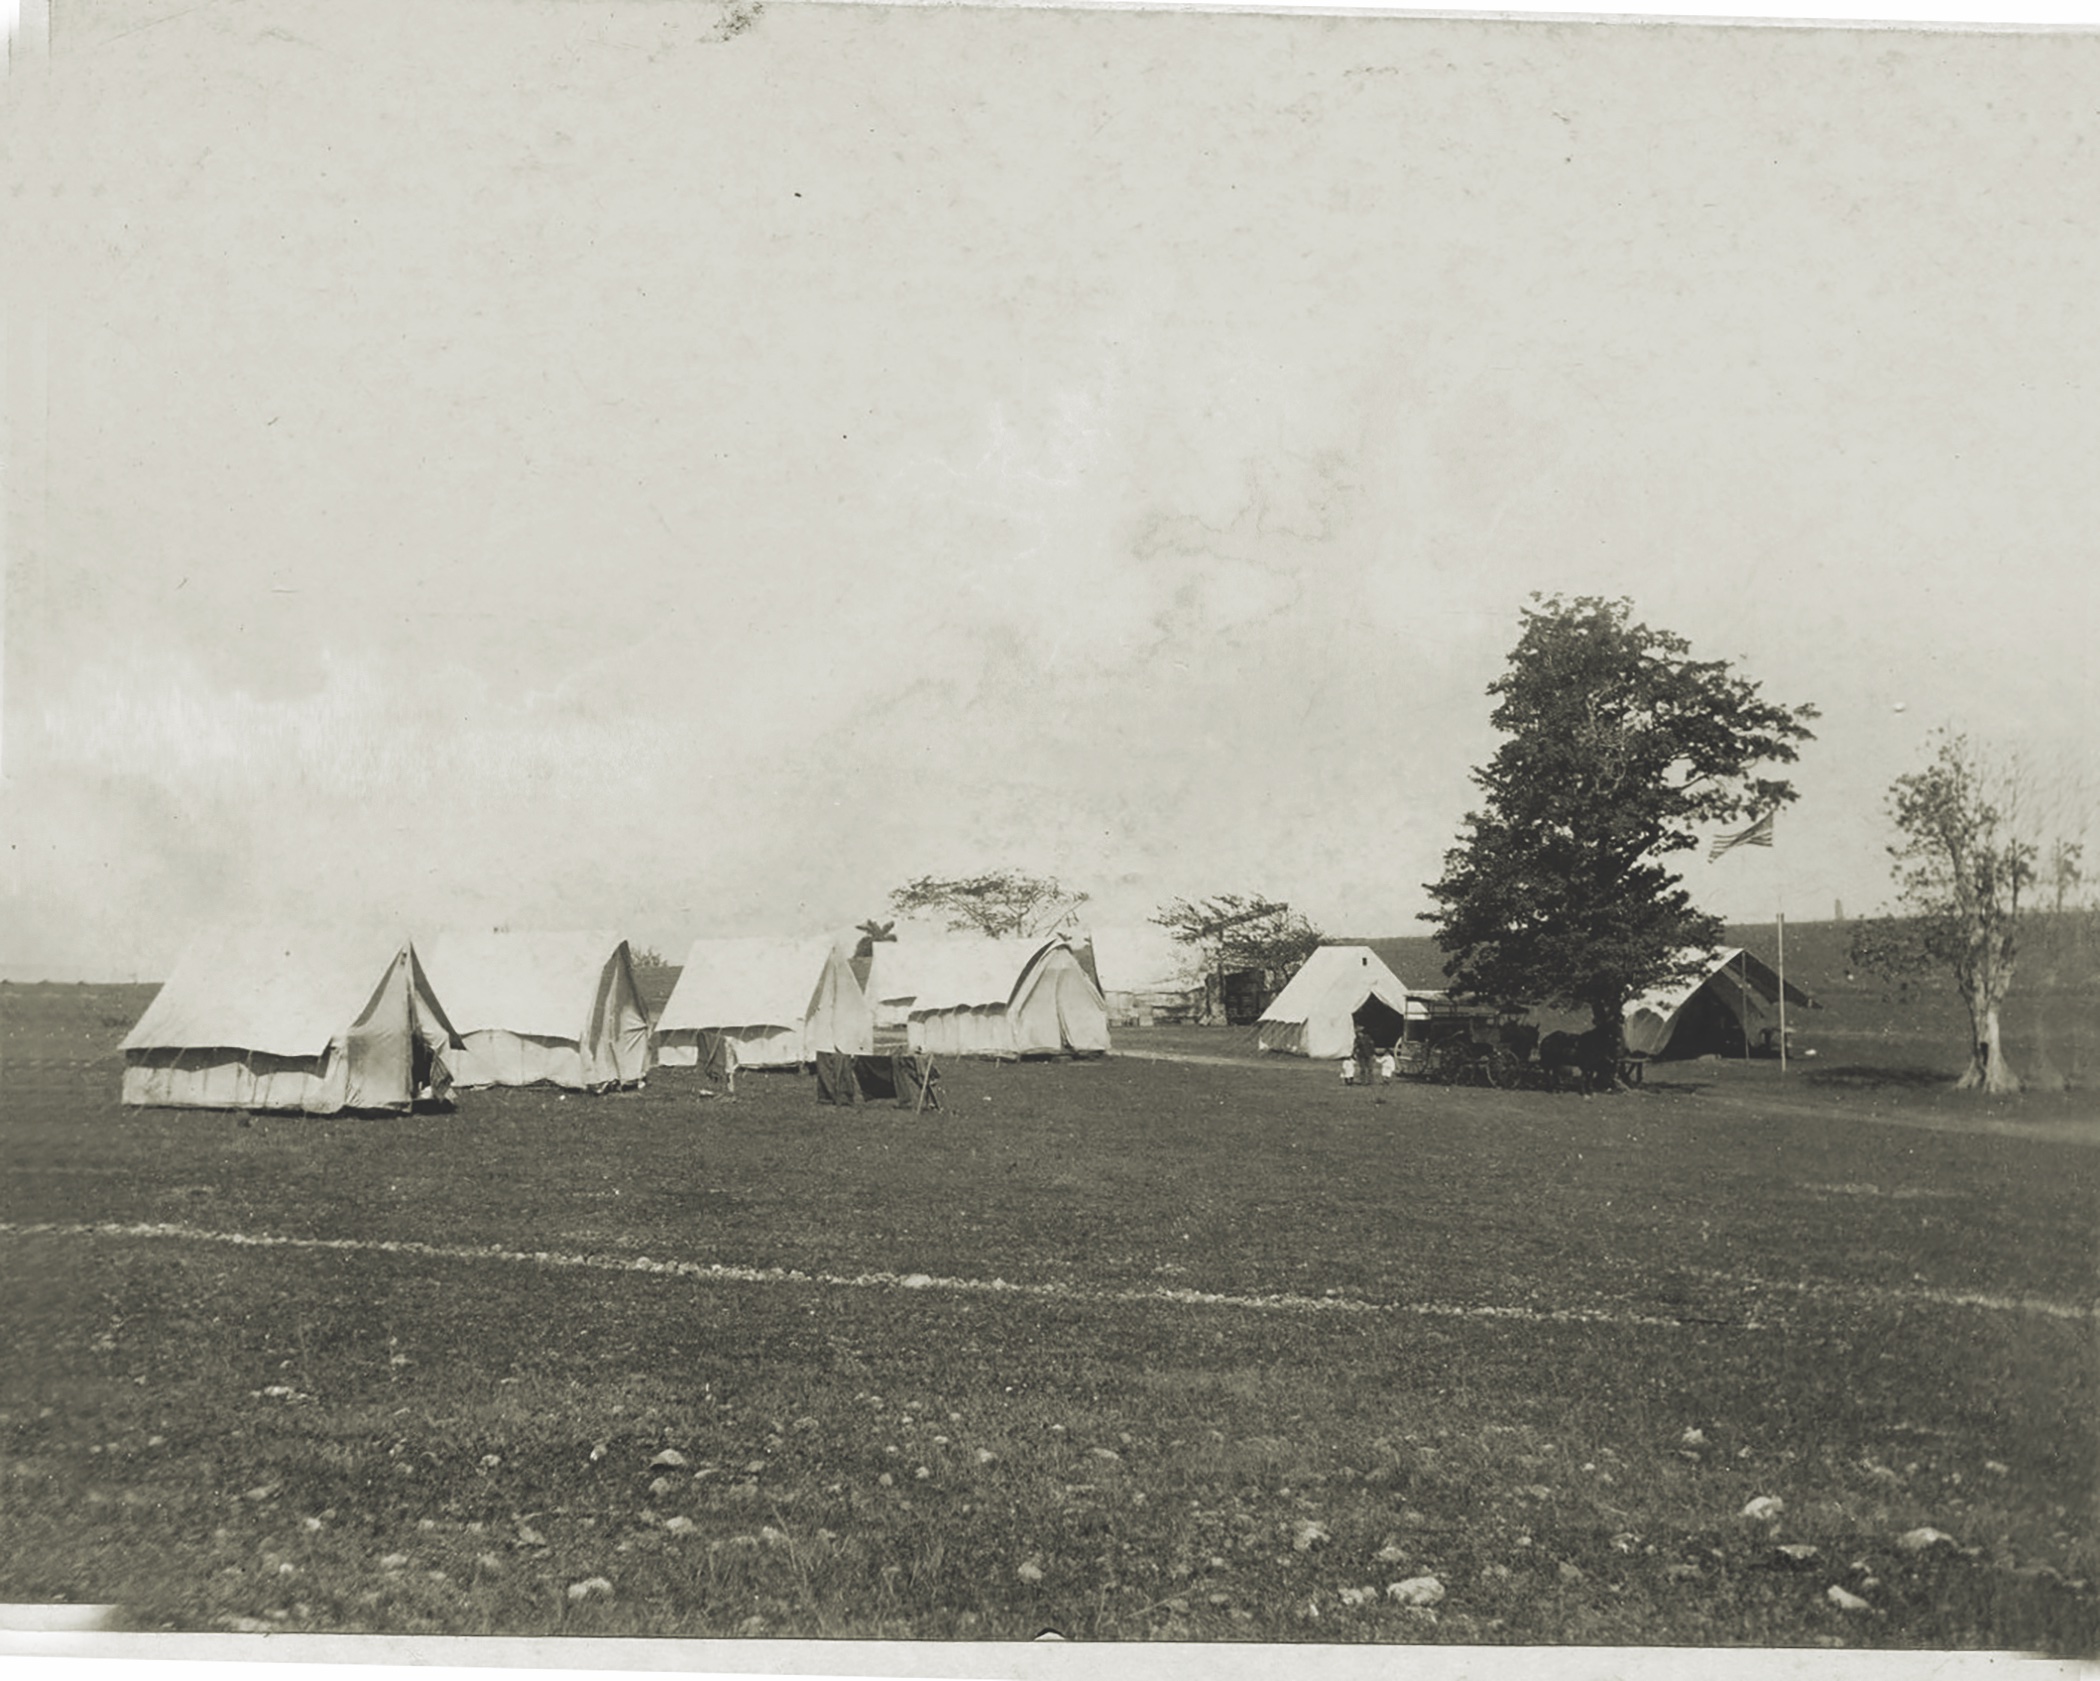 Camp Lazear, Reed’s experimental station near Quemados, Cuba. (Claude Moore Health Sciences Library, University of Virginia)